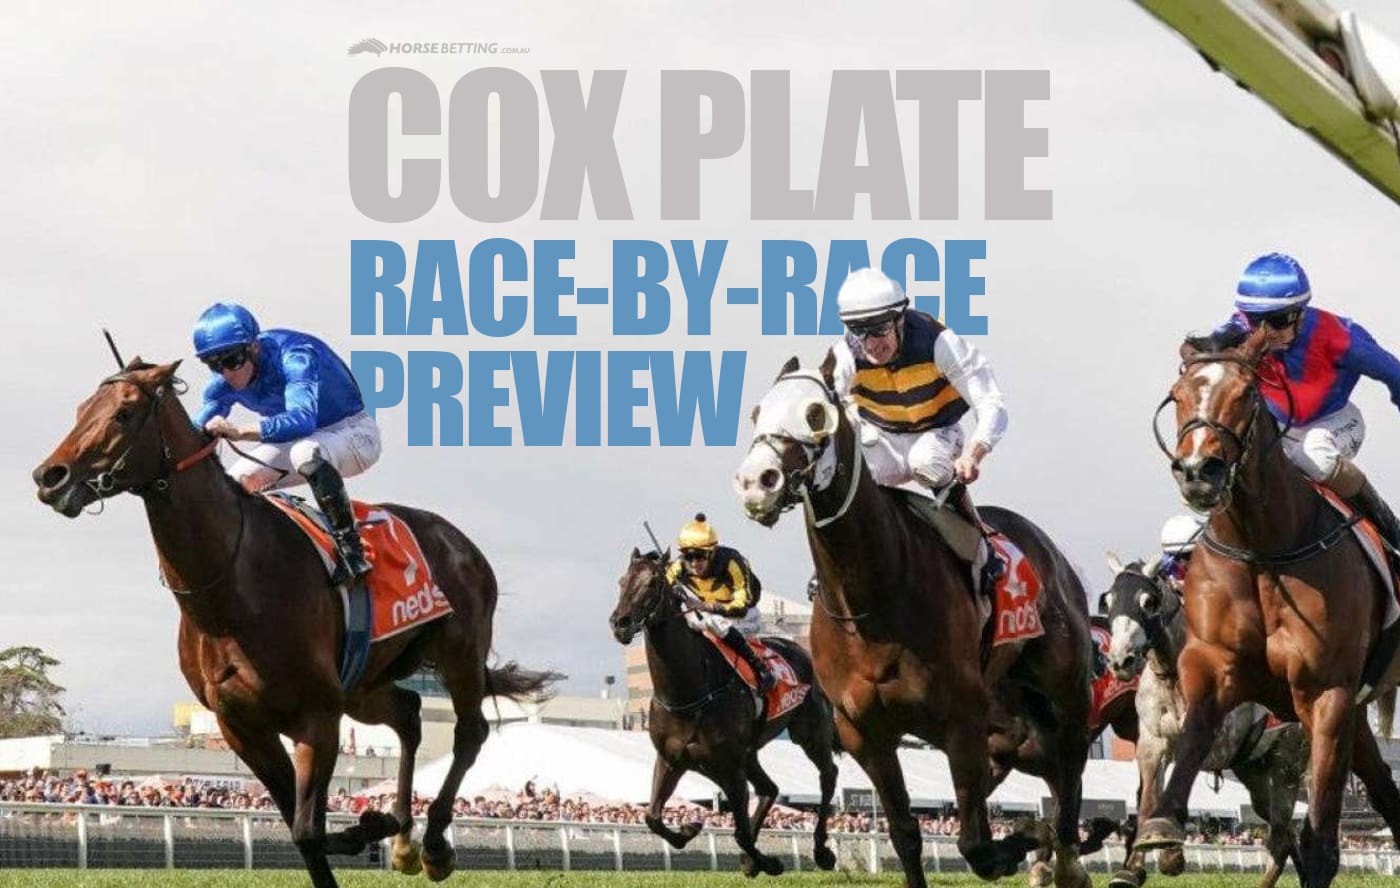 Cox Plate Day 2023 Preview